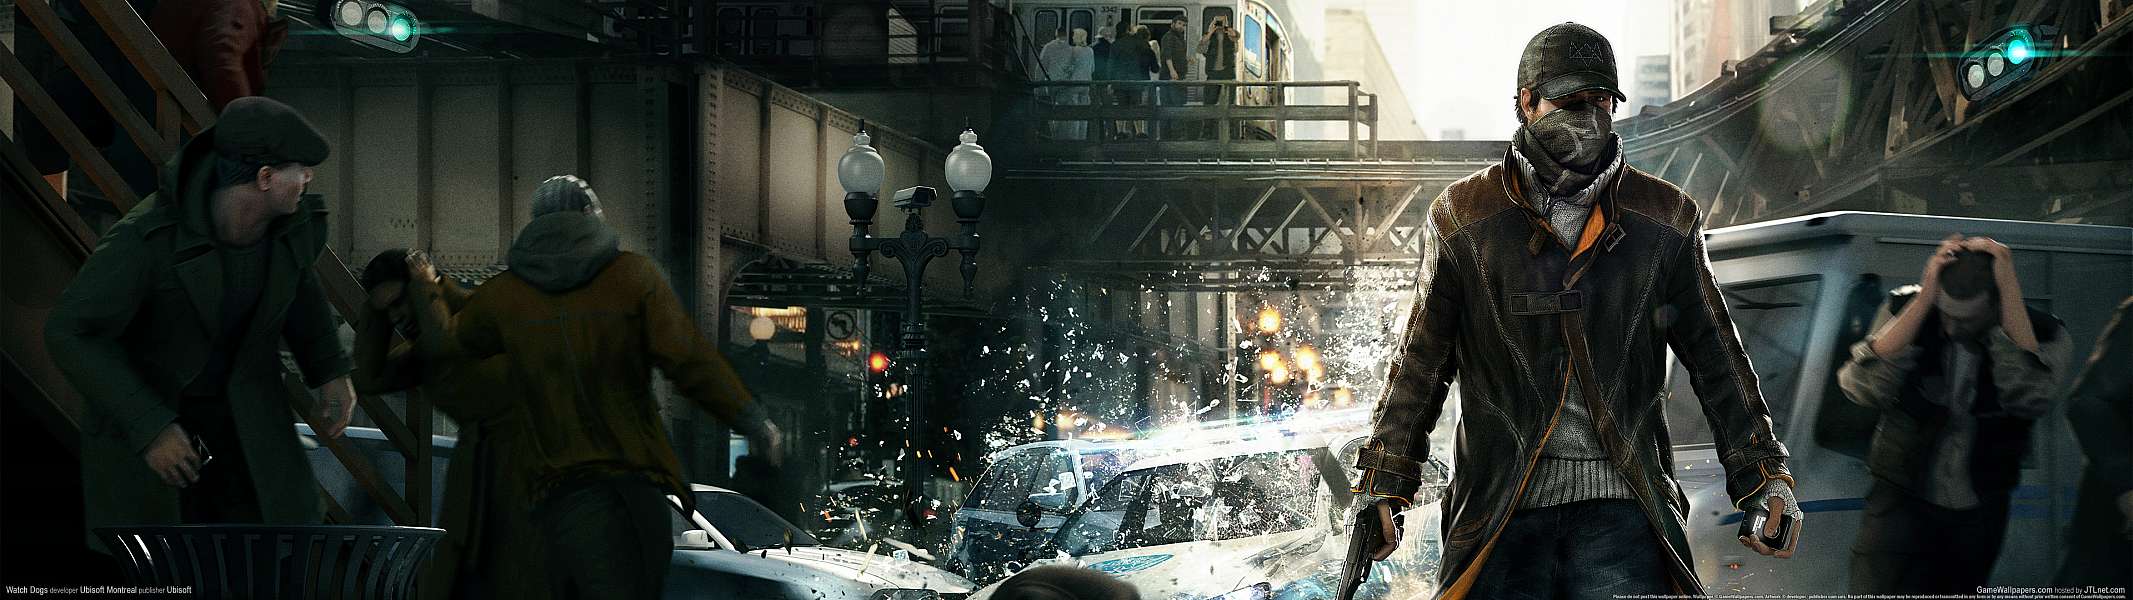 Watch Dogs dual screen wallpaper or background